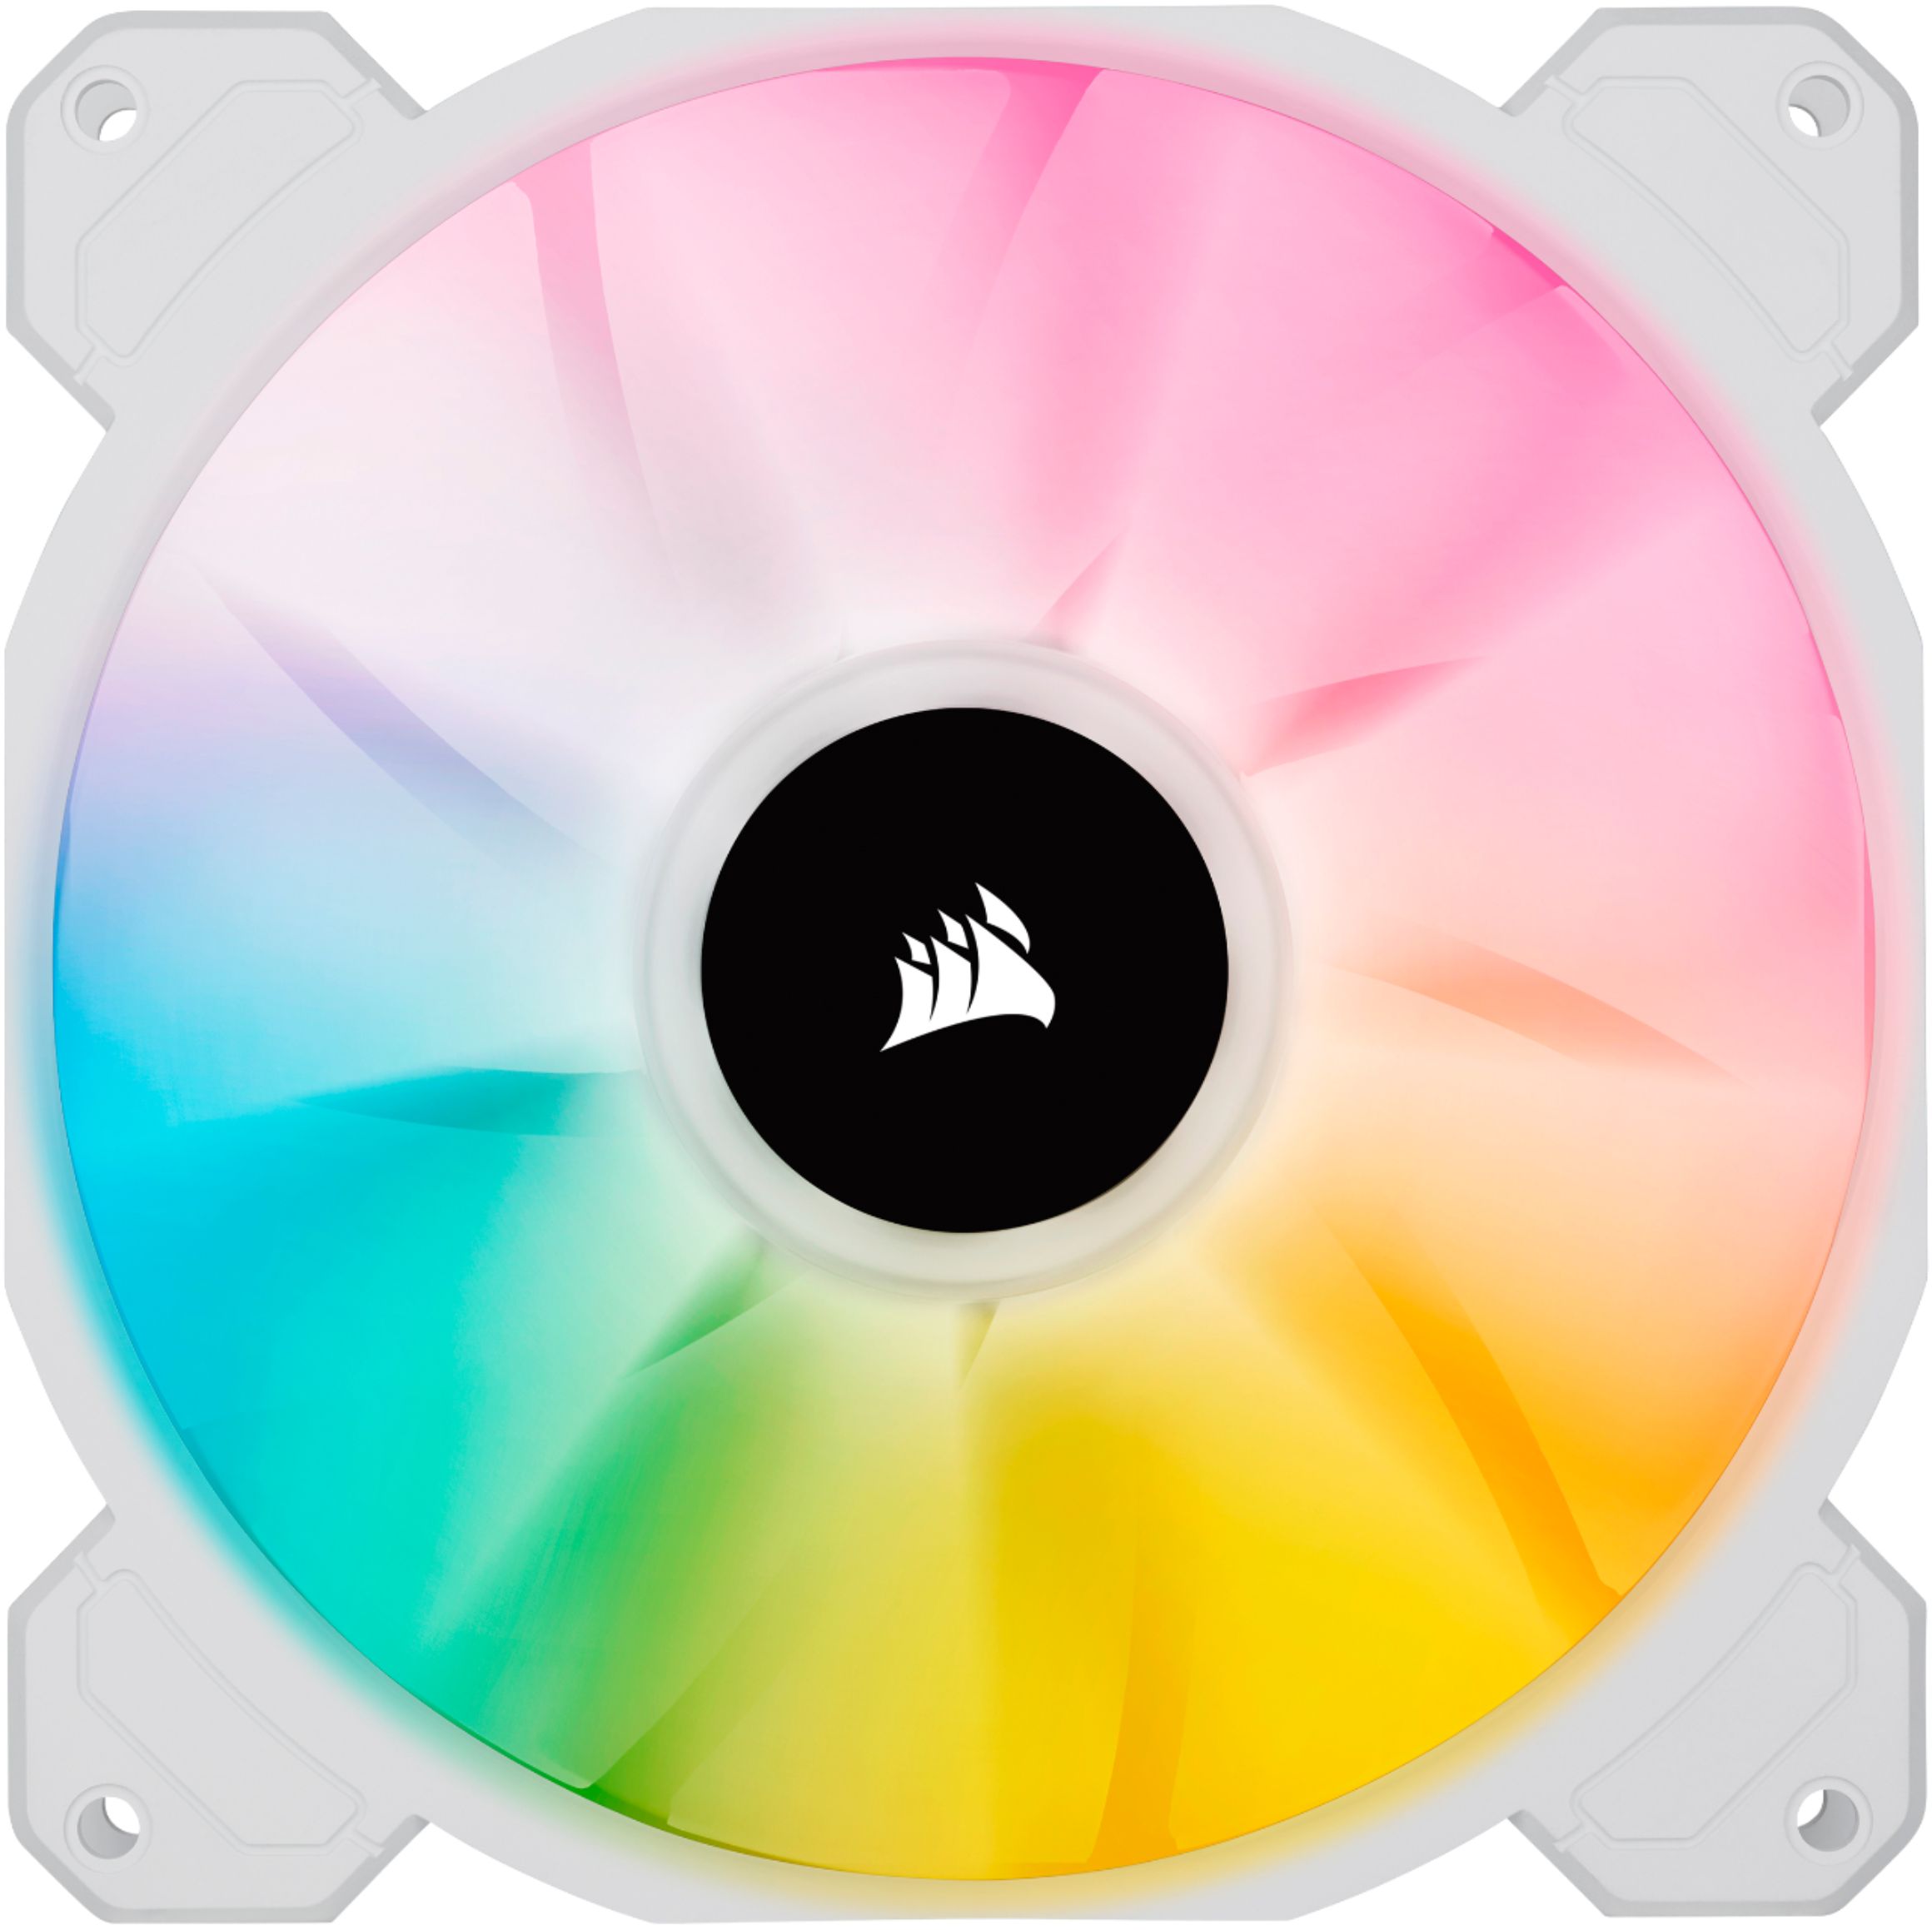 CORSAIR iCUE RGB 140mm PWM White with Buy CO-9050139-WW Performance - ELITE Fan White SP140 Kit Lighting Dual Node CORE Best iCUE